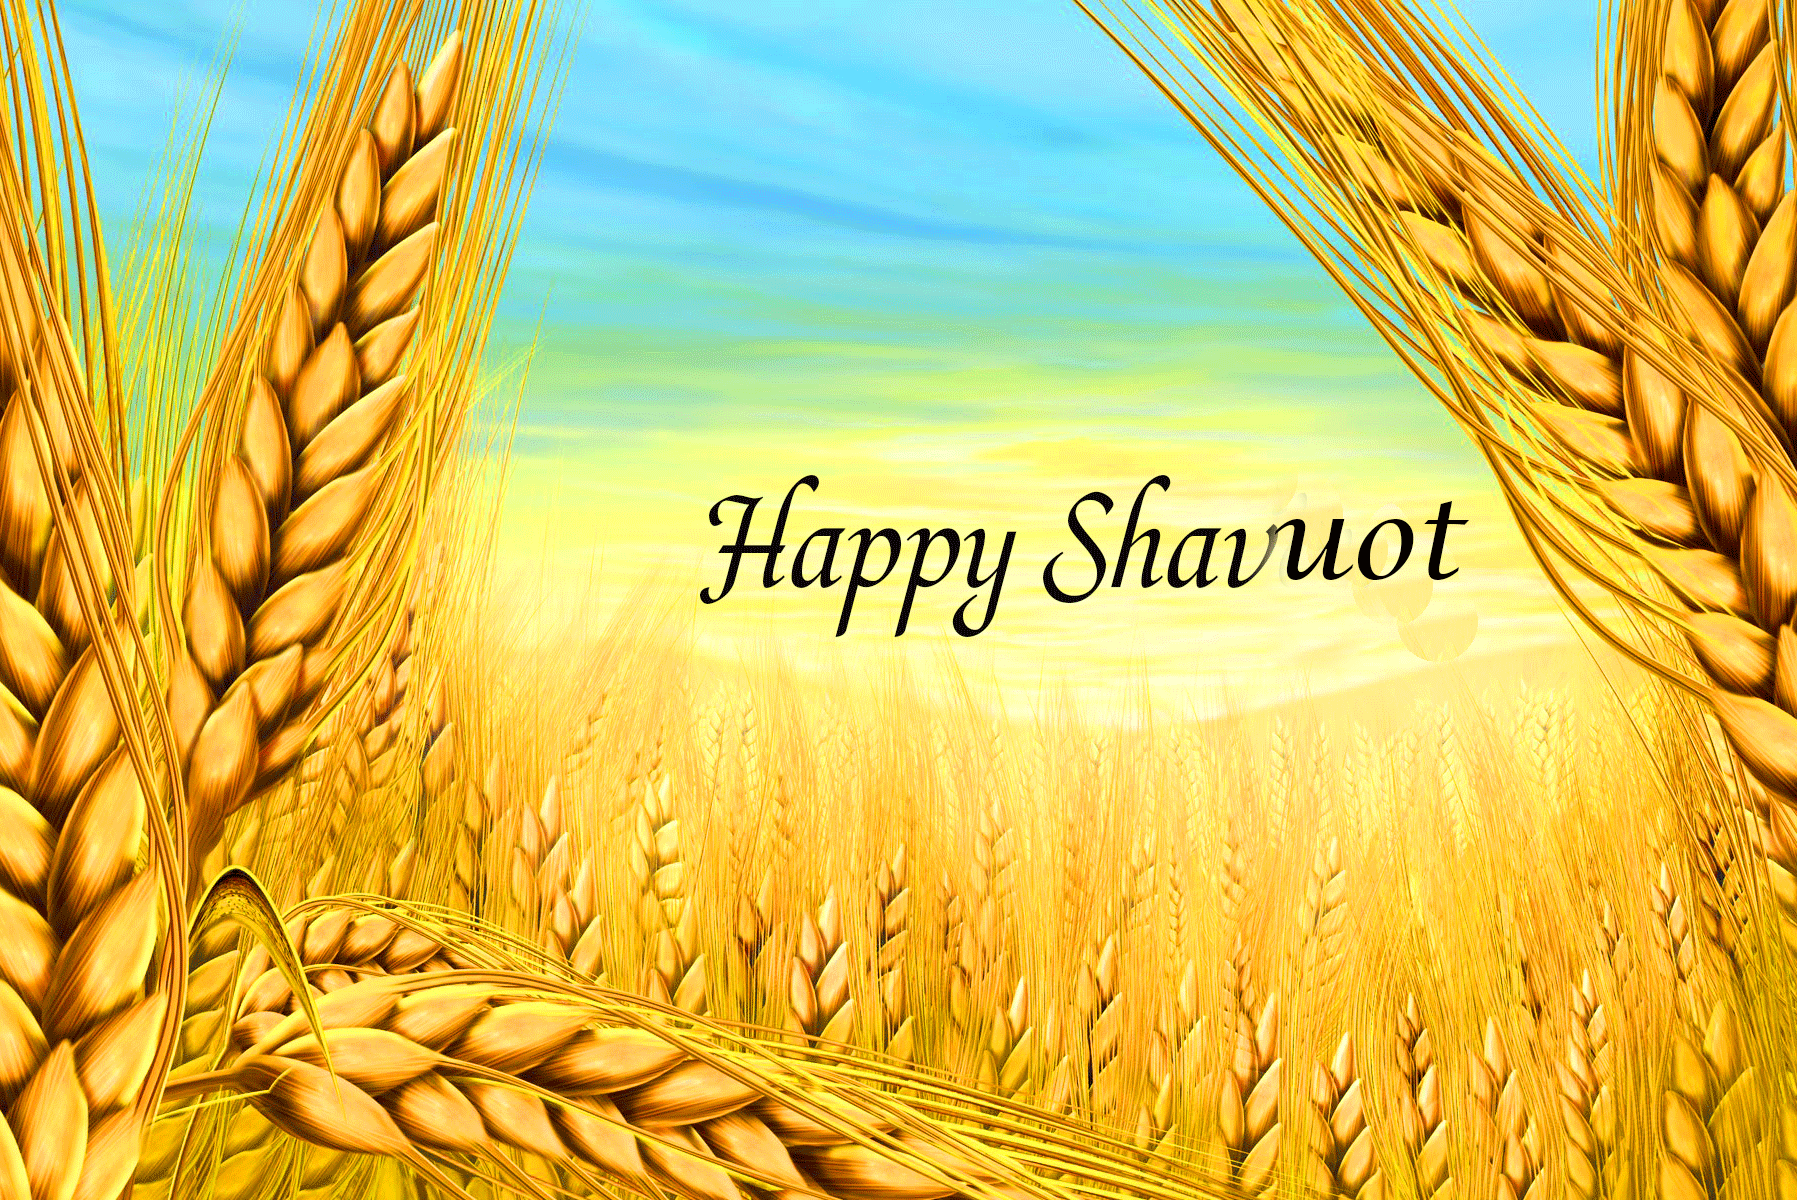 38+ Happy Shavuot Images With Quotes and Messages Good Morning